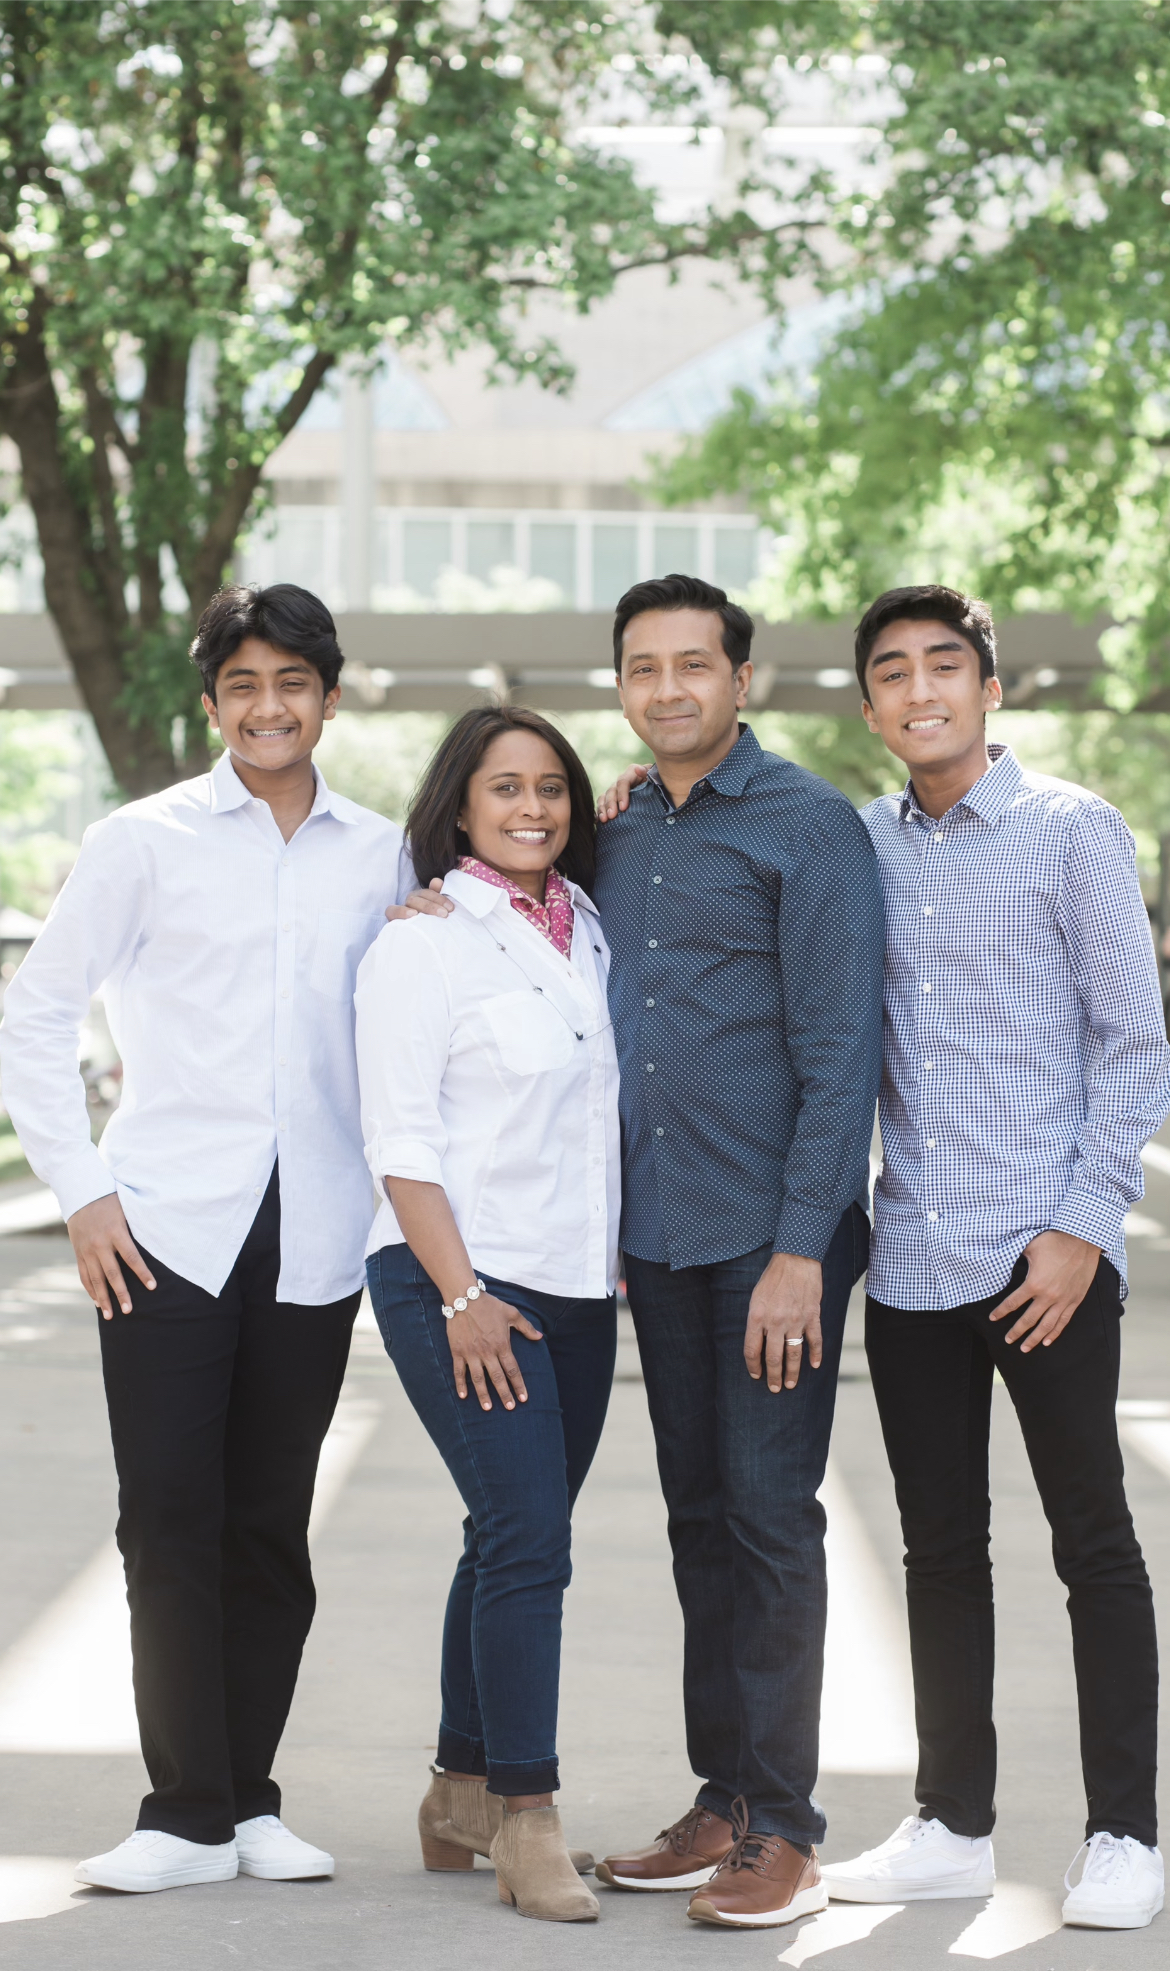 The Mathai family pose for a picture together. They encourage supporting future medical leaders through their donations and philanthropic work.